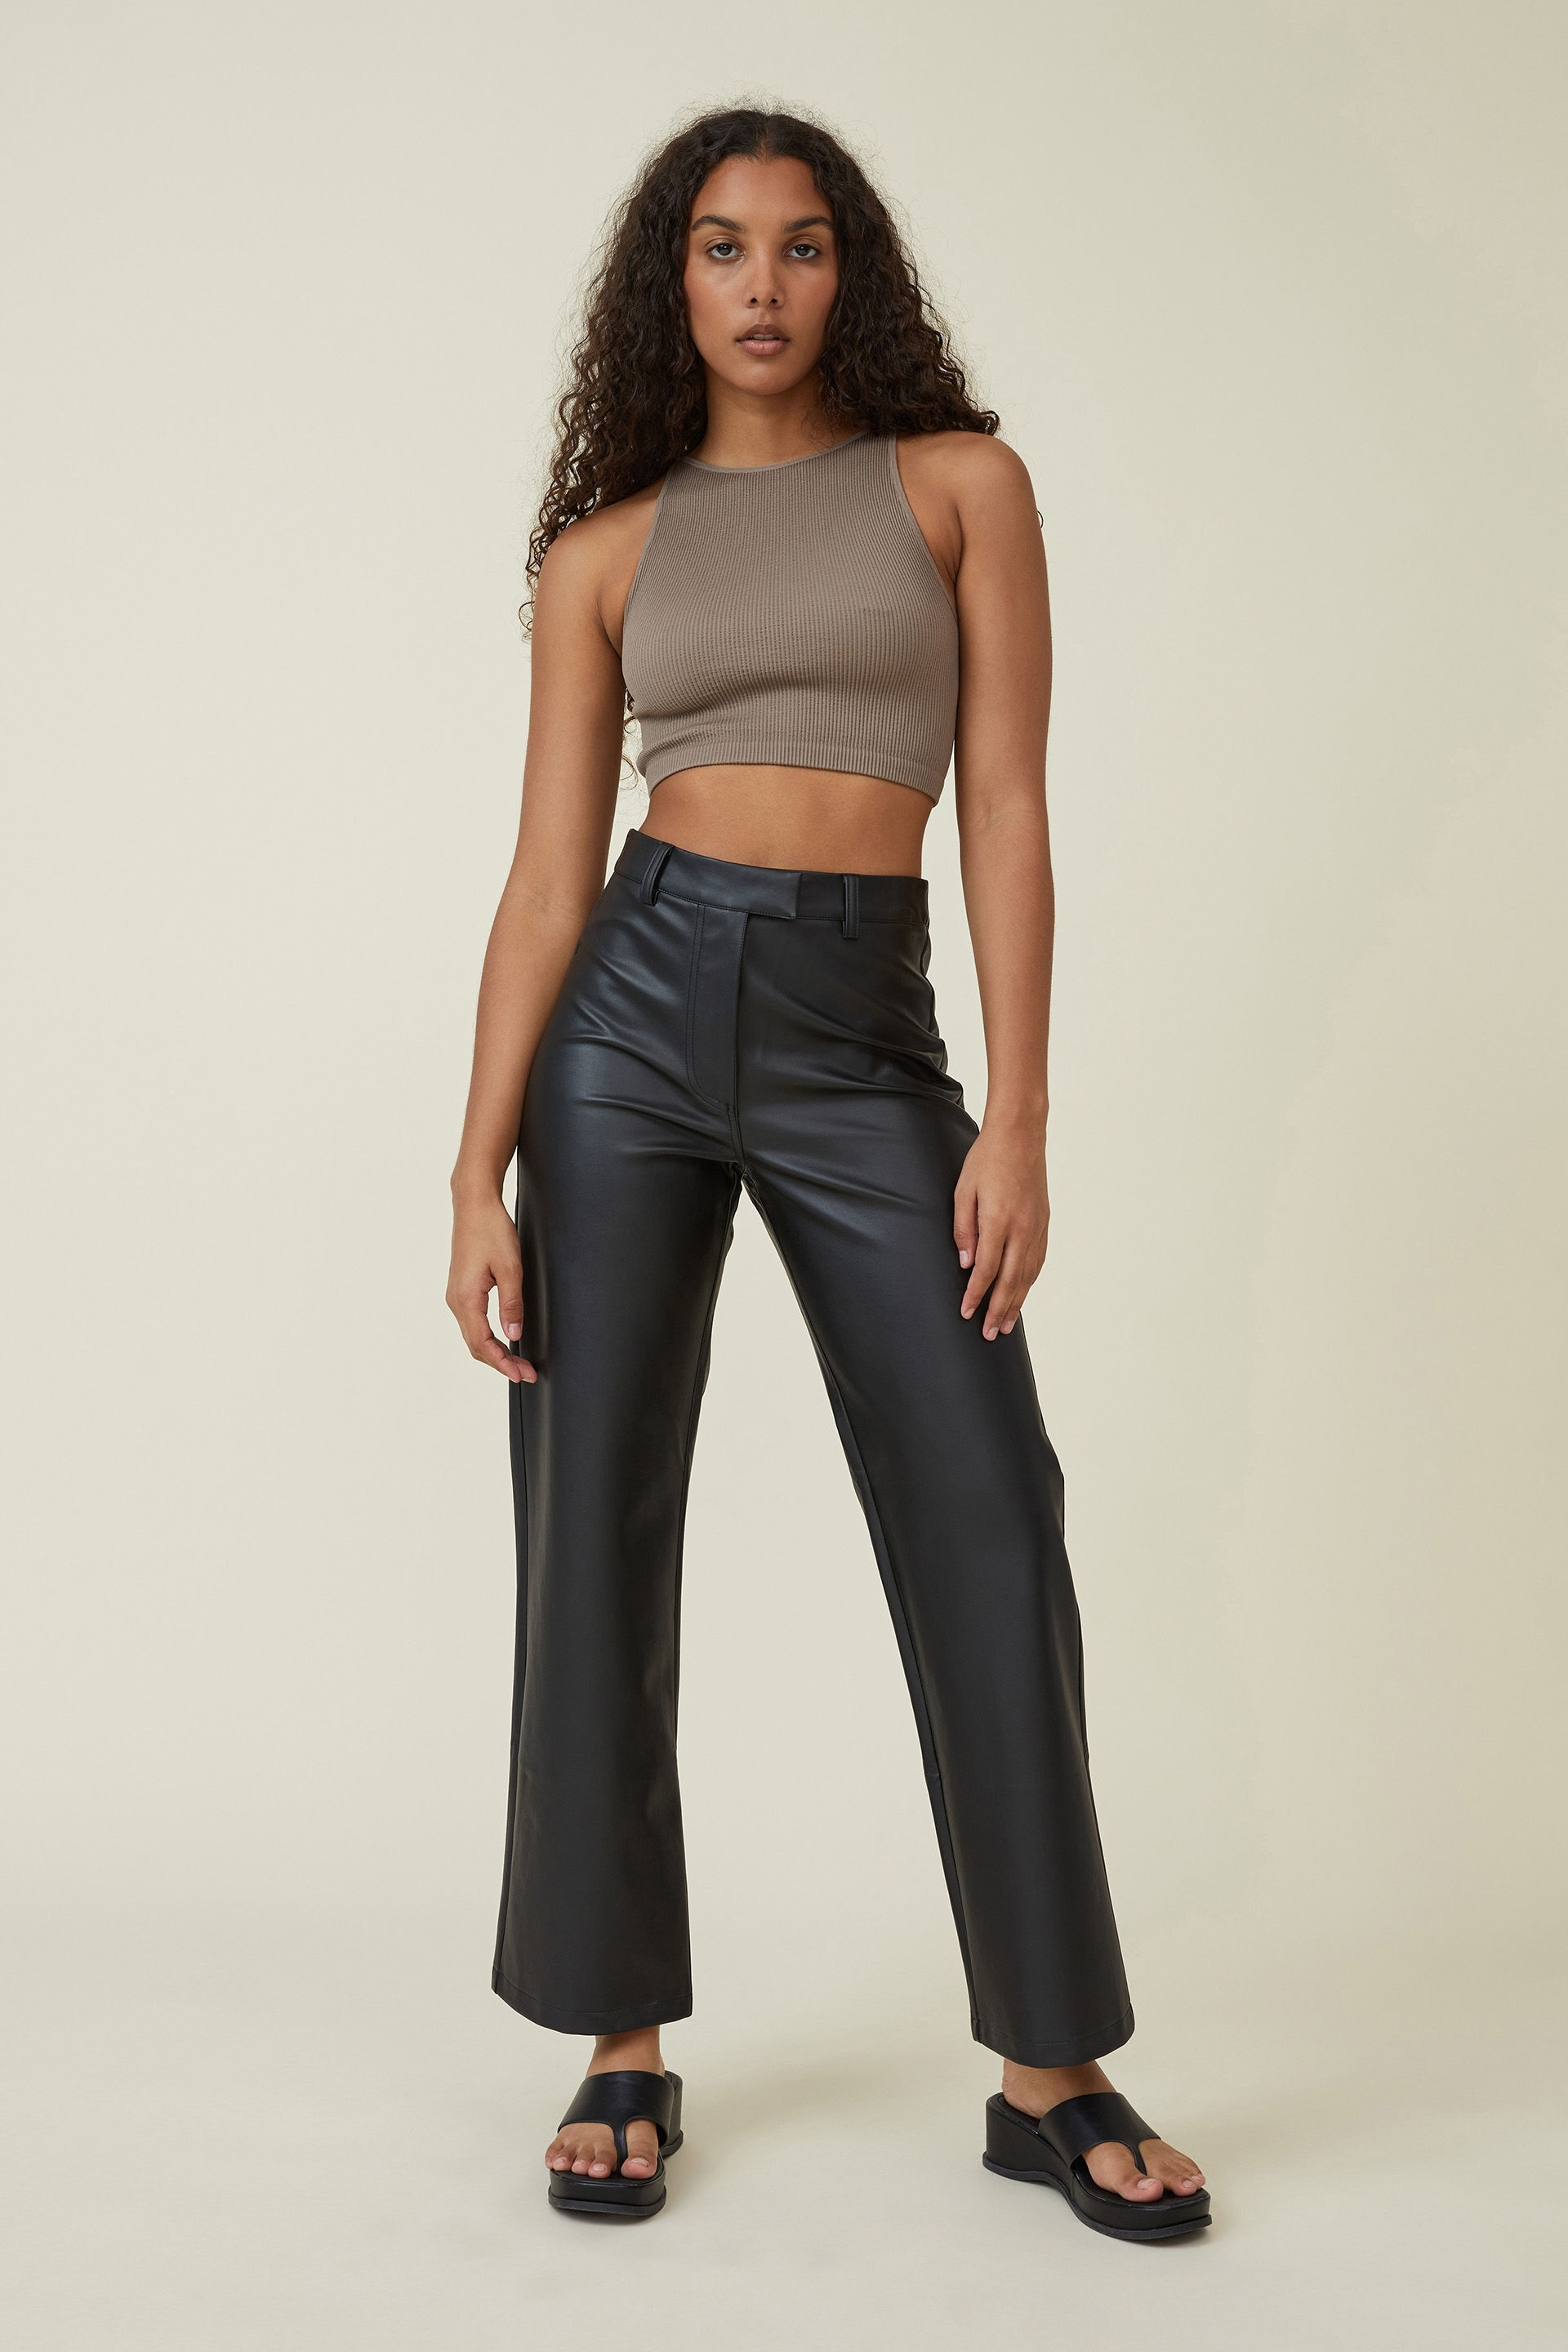 Buy Brown Trousers & Pants for Women by LEVIS Online | Ajio.com